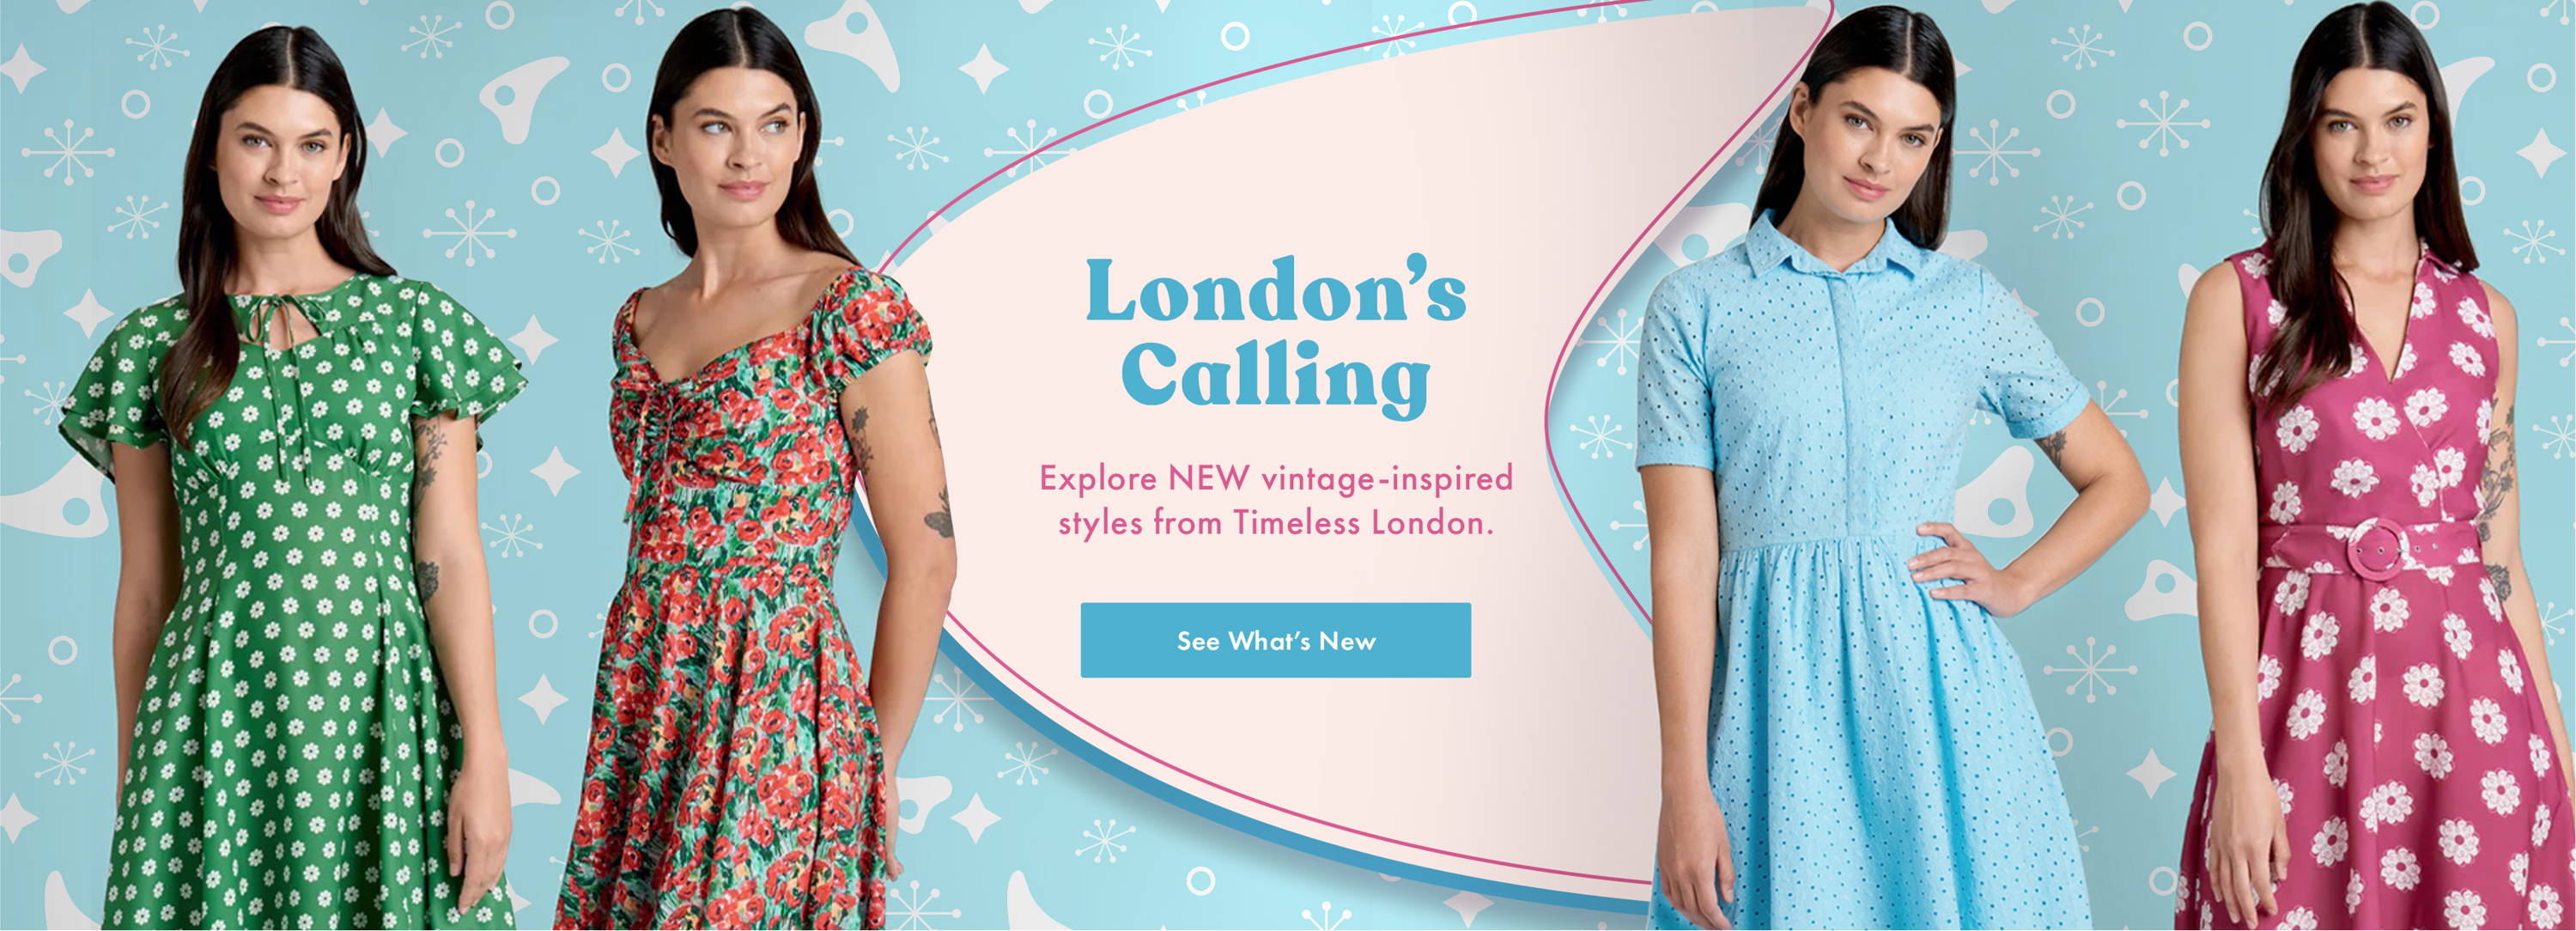 London’s Calling. Explore NEW vintage-inspired styles from Timeless London. 